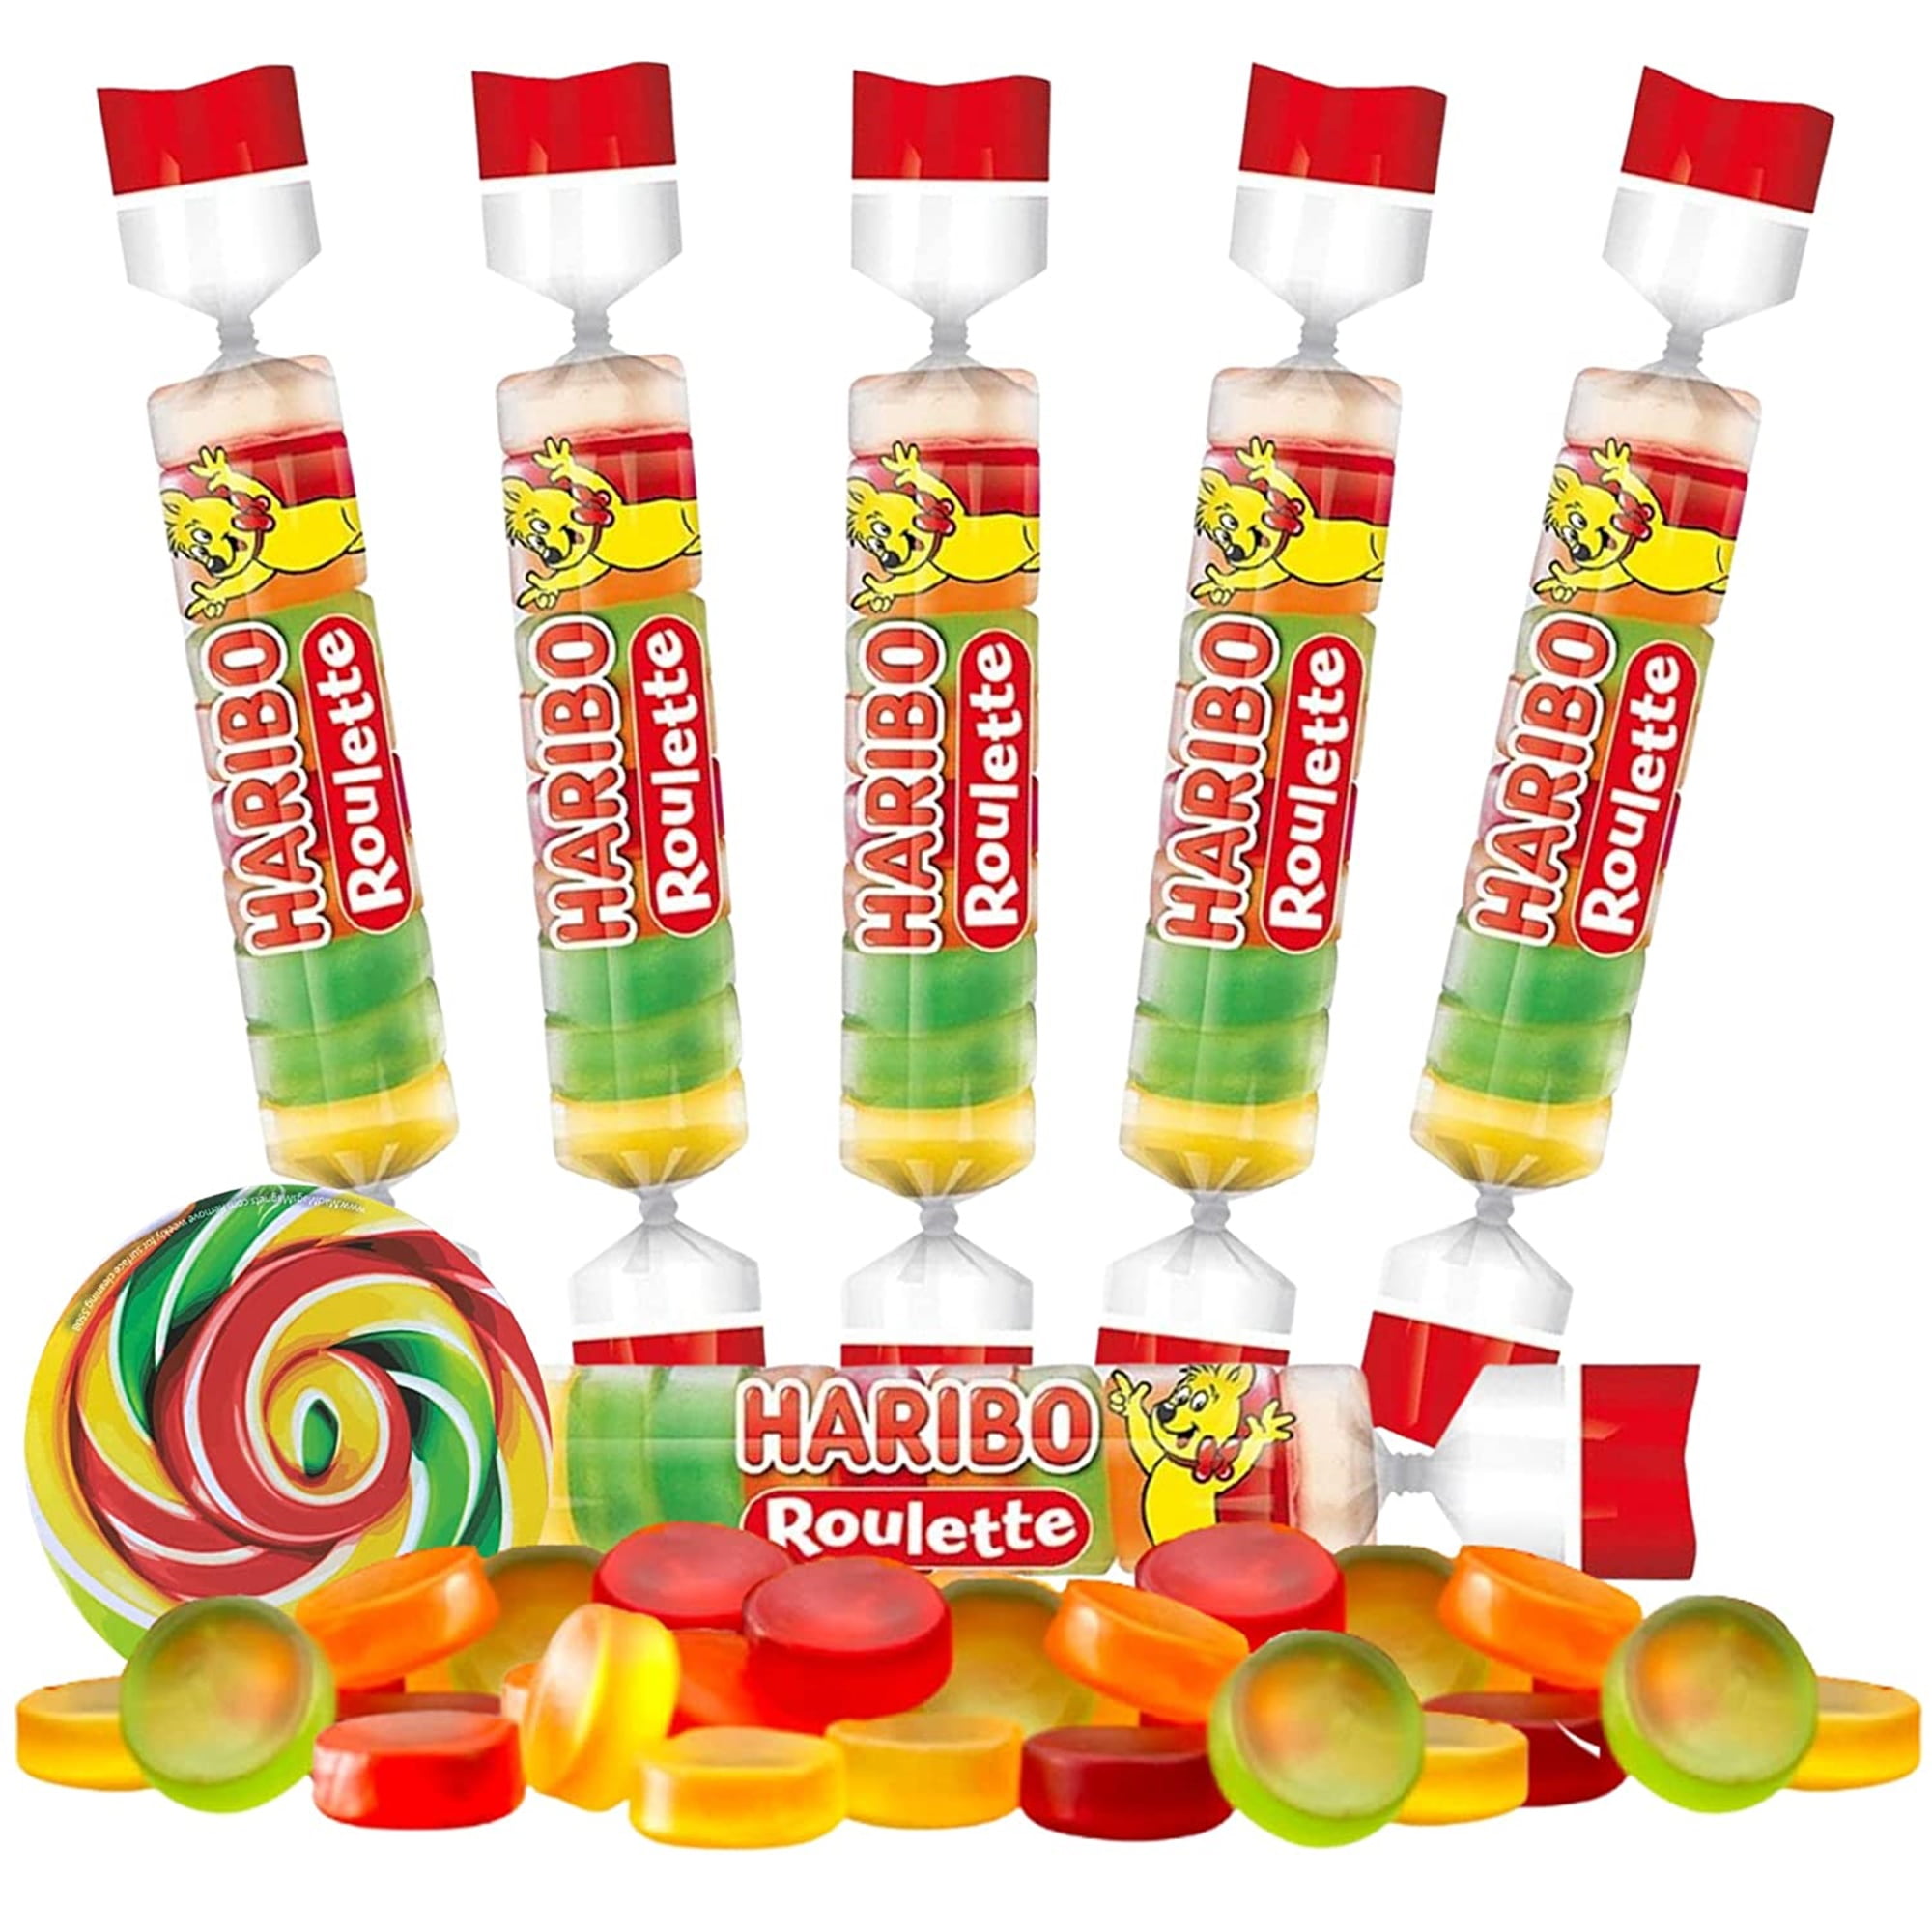 Haribo Roulette Gummy Candy with Candy Swirl Magnet, Party Favors, Pack of  6, .875 Ounces Each